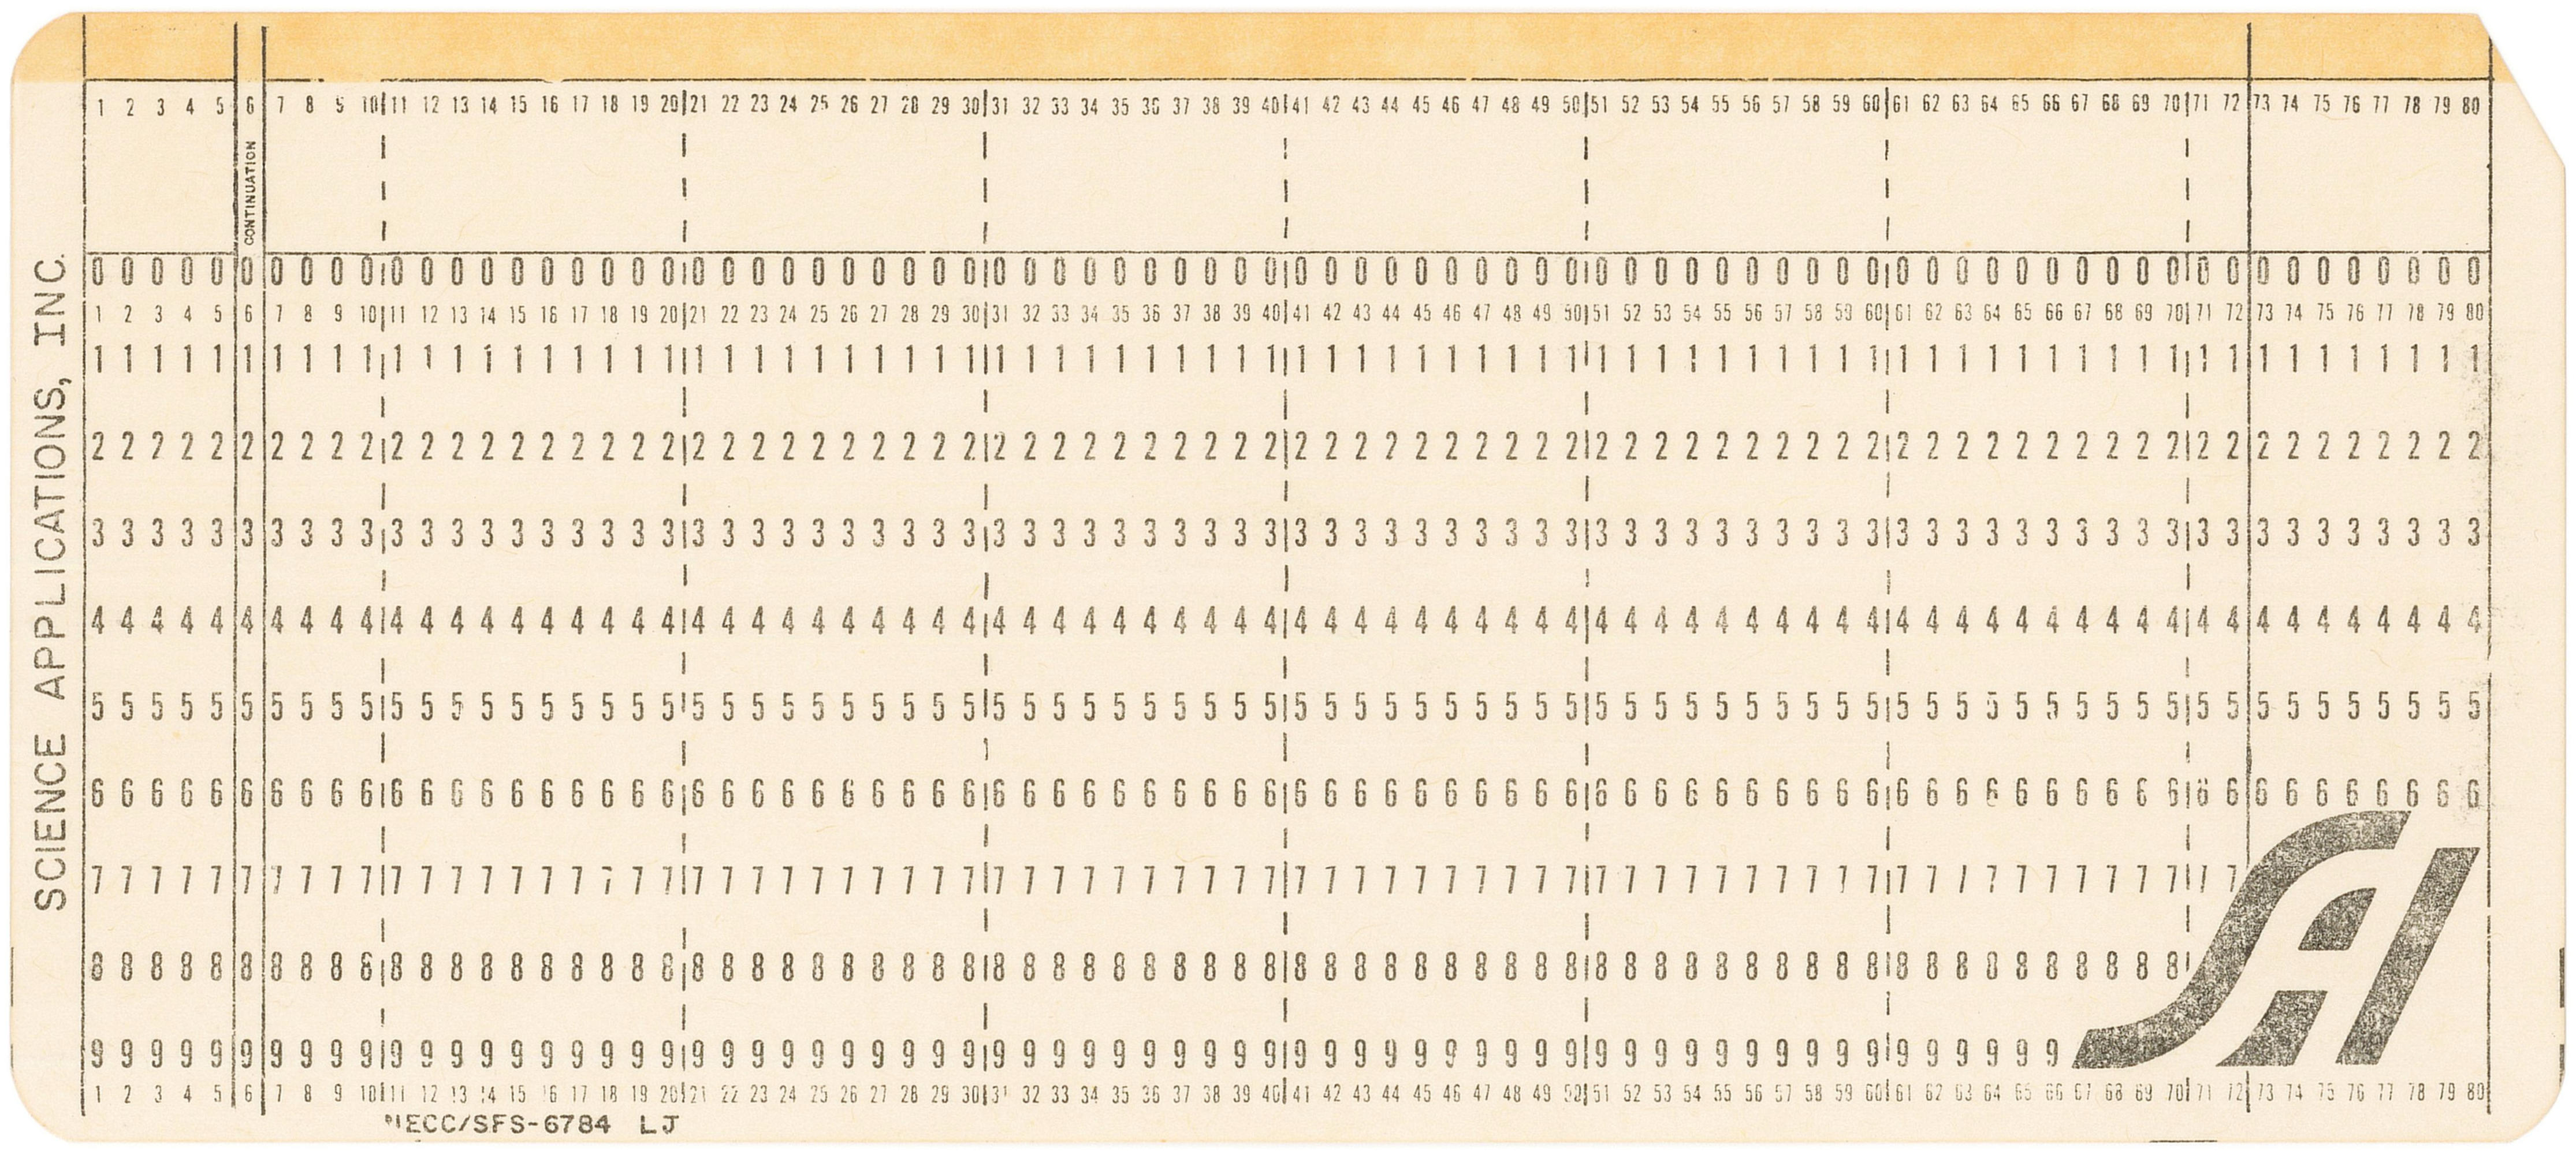 Douglas W. Jones's collection of punched cards for computer programs